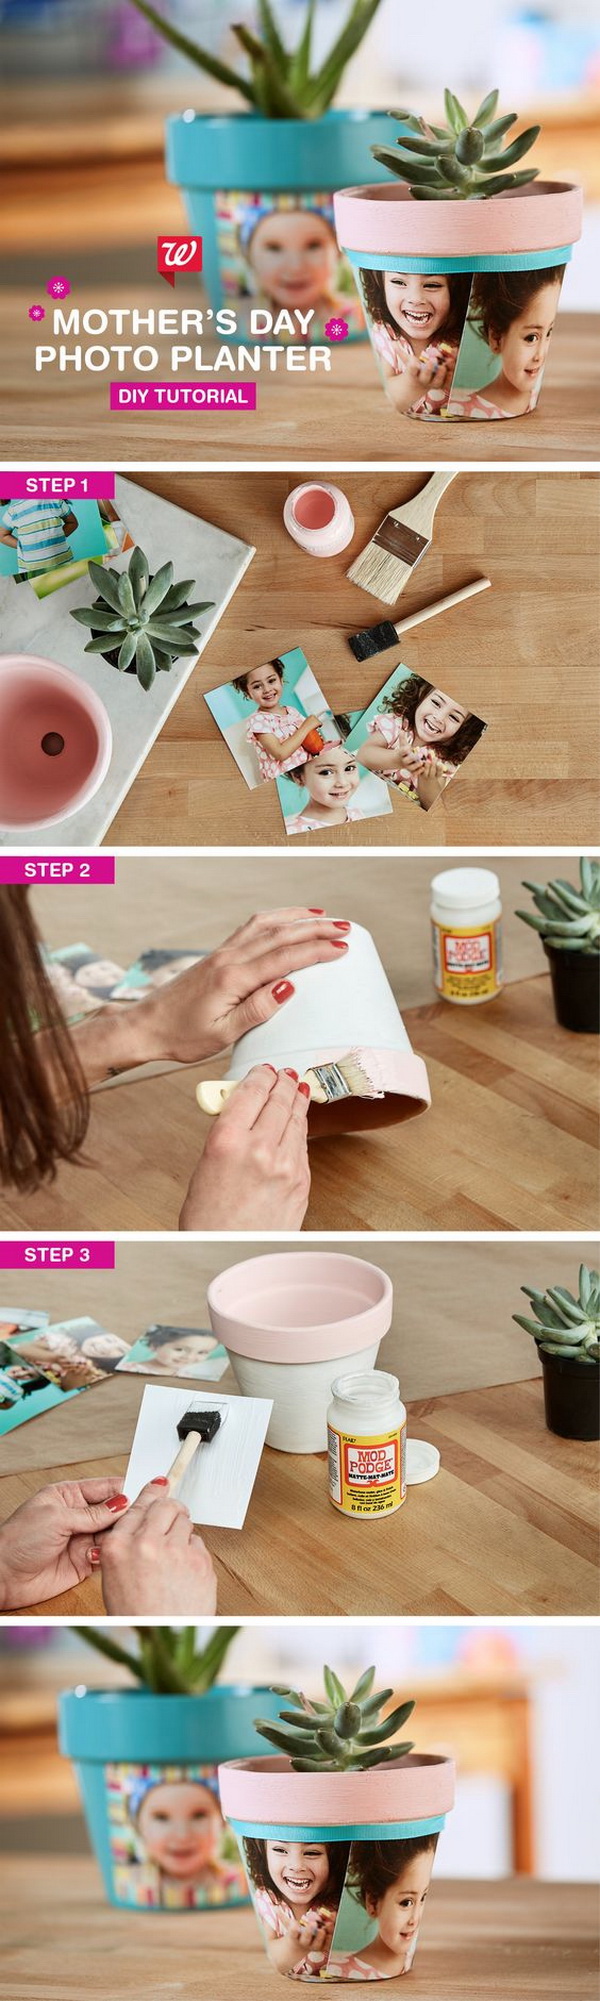 DIY Photo Planter. Create this easy DIY photo planter for Mom, Grandma, and all the special mothers in your life. 